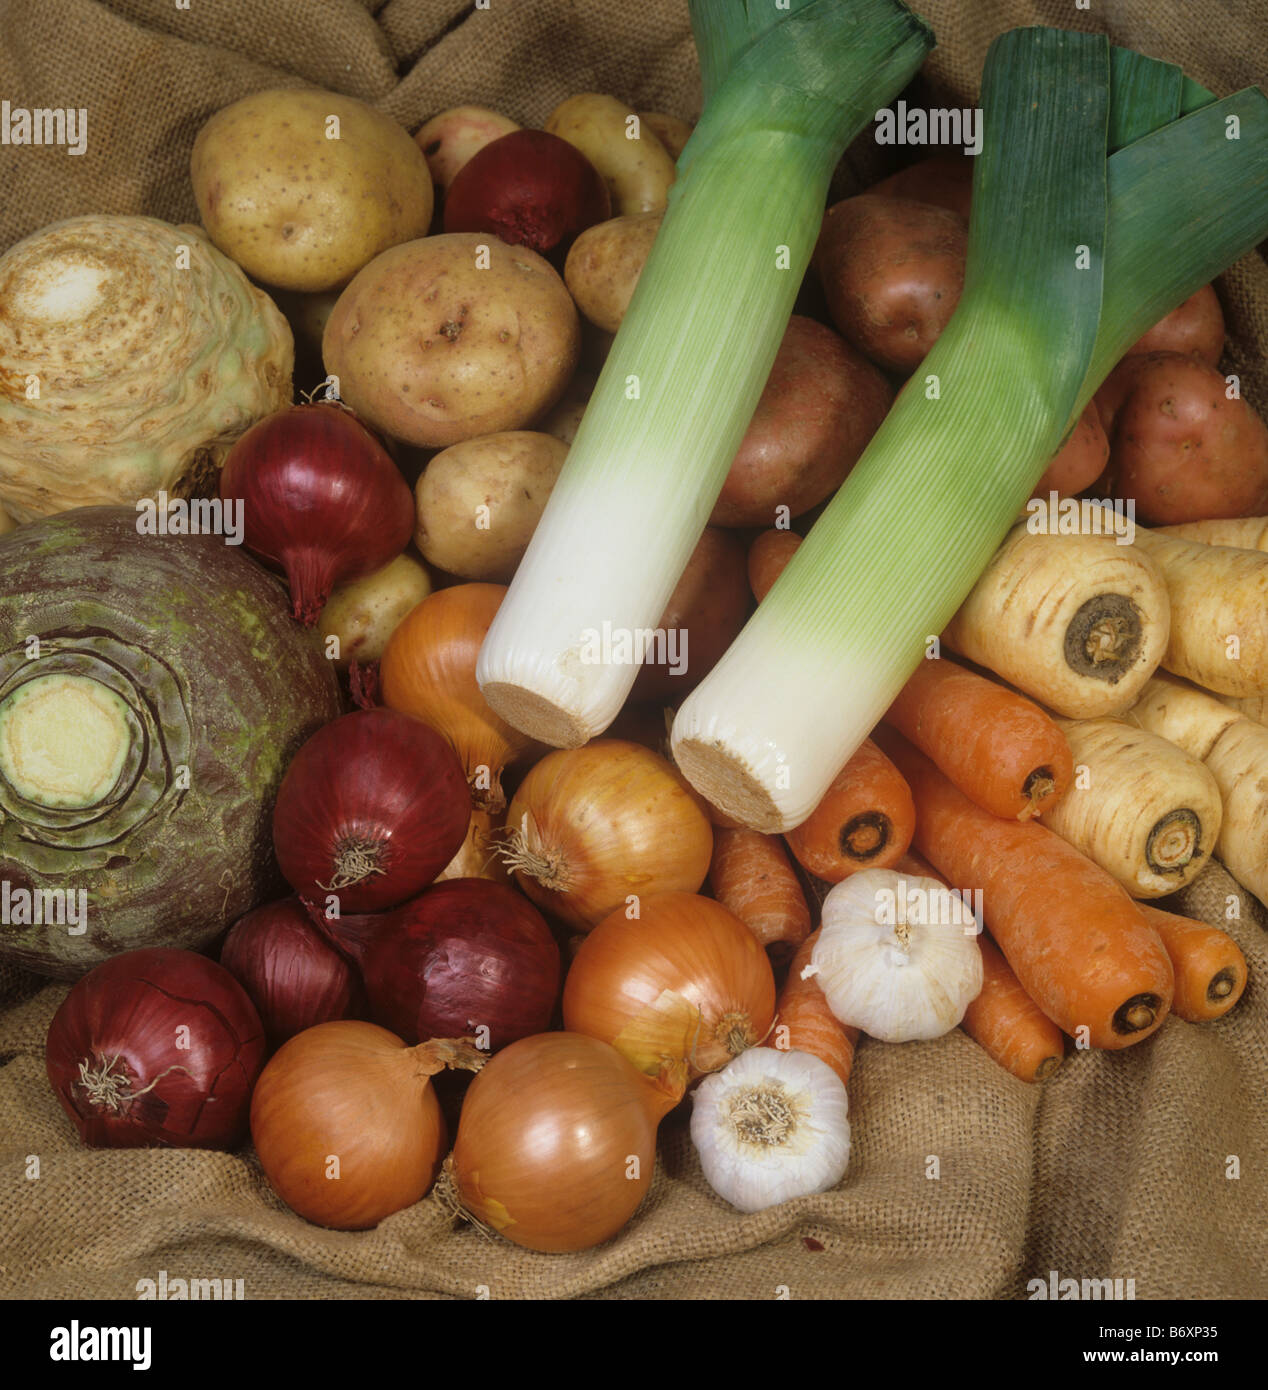 A selection of root vegetables bught in the supermarket Stock Photo